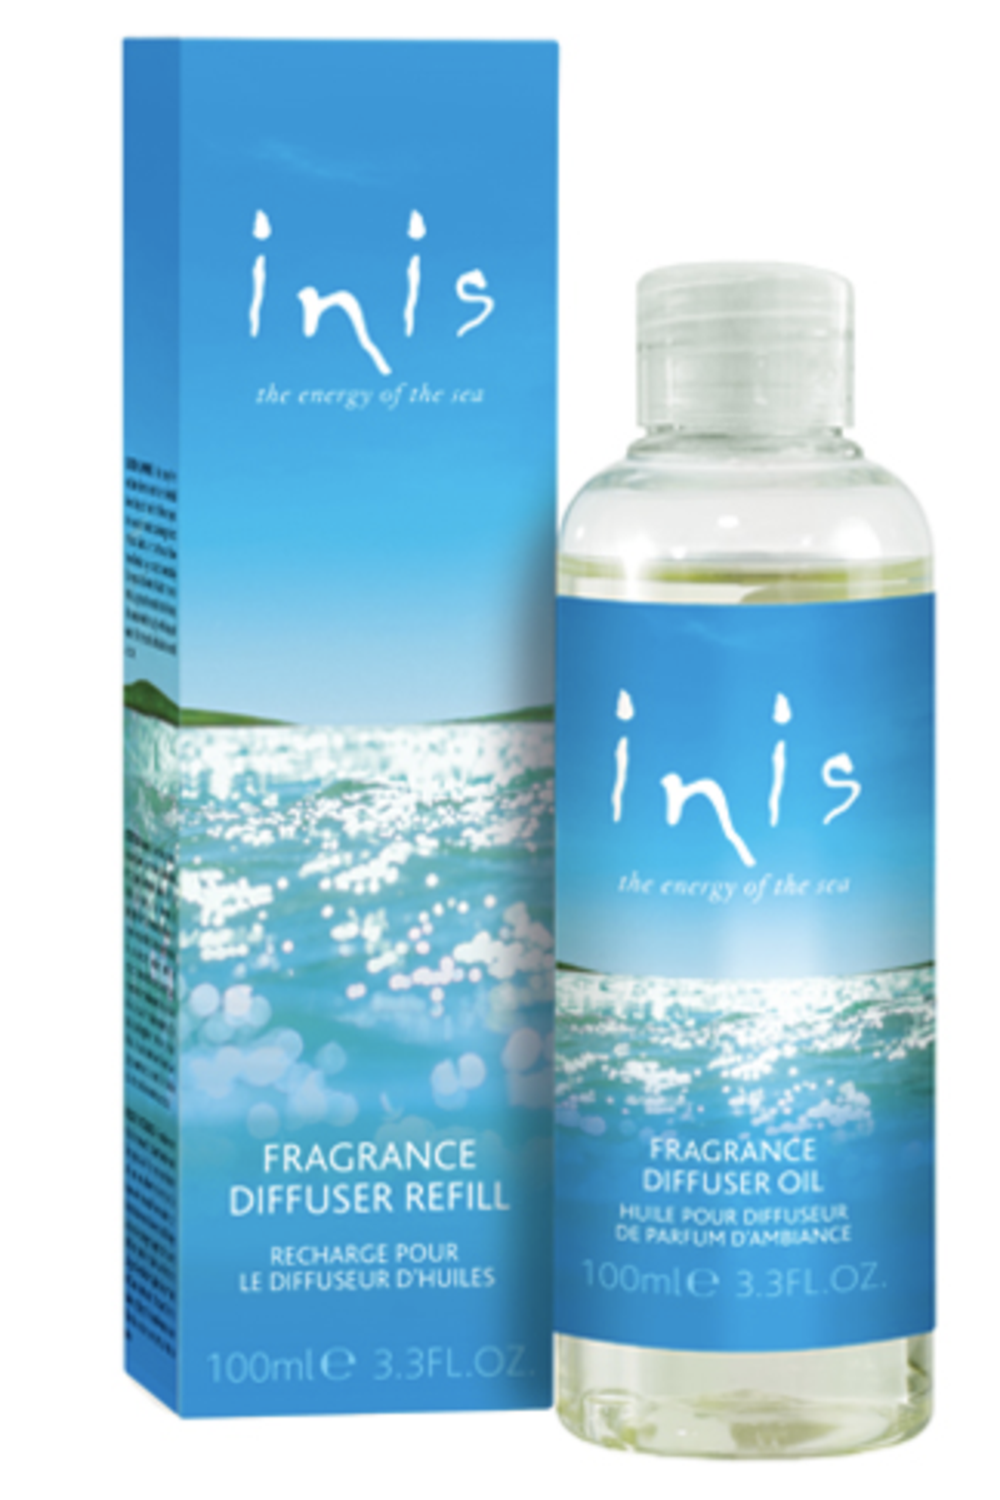 Inis "Energy of the Sea" Diffuser Refill